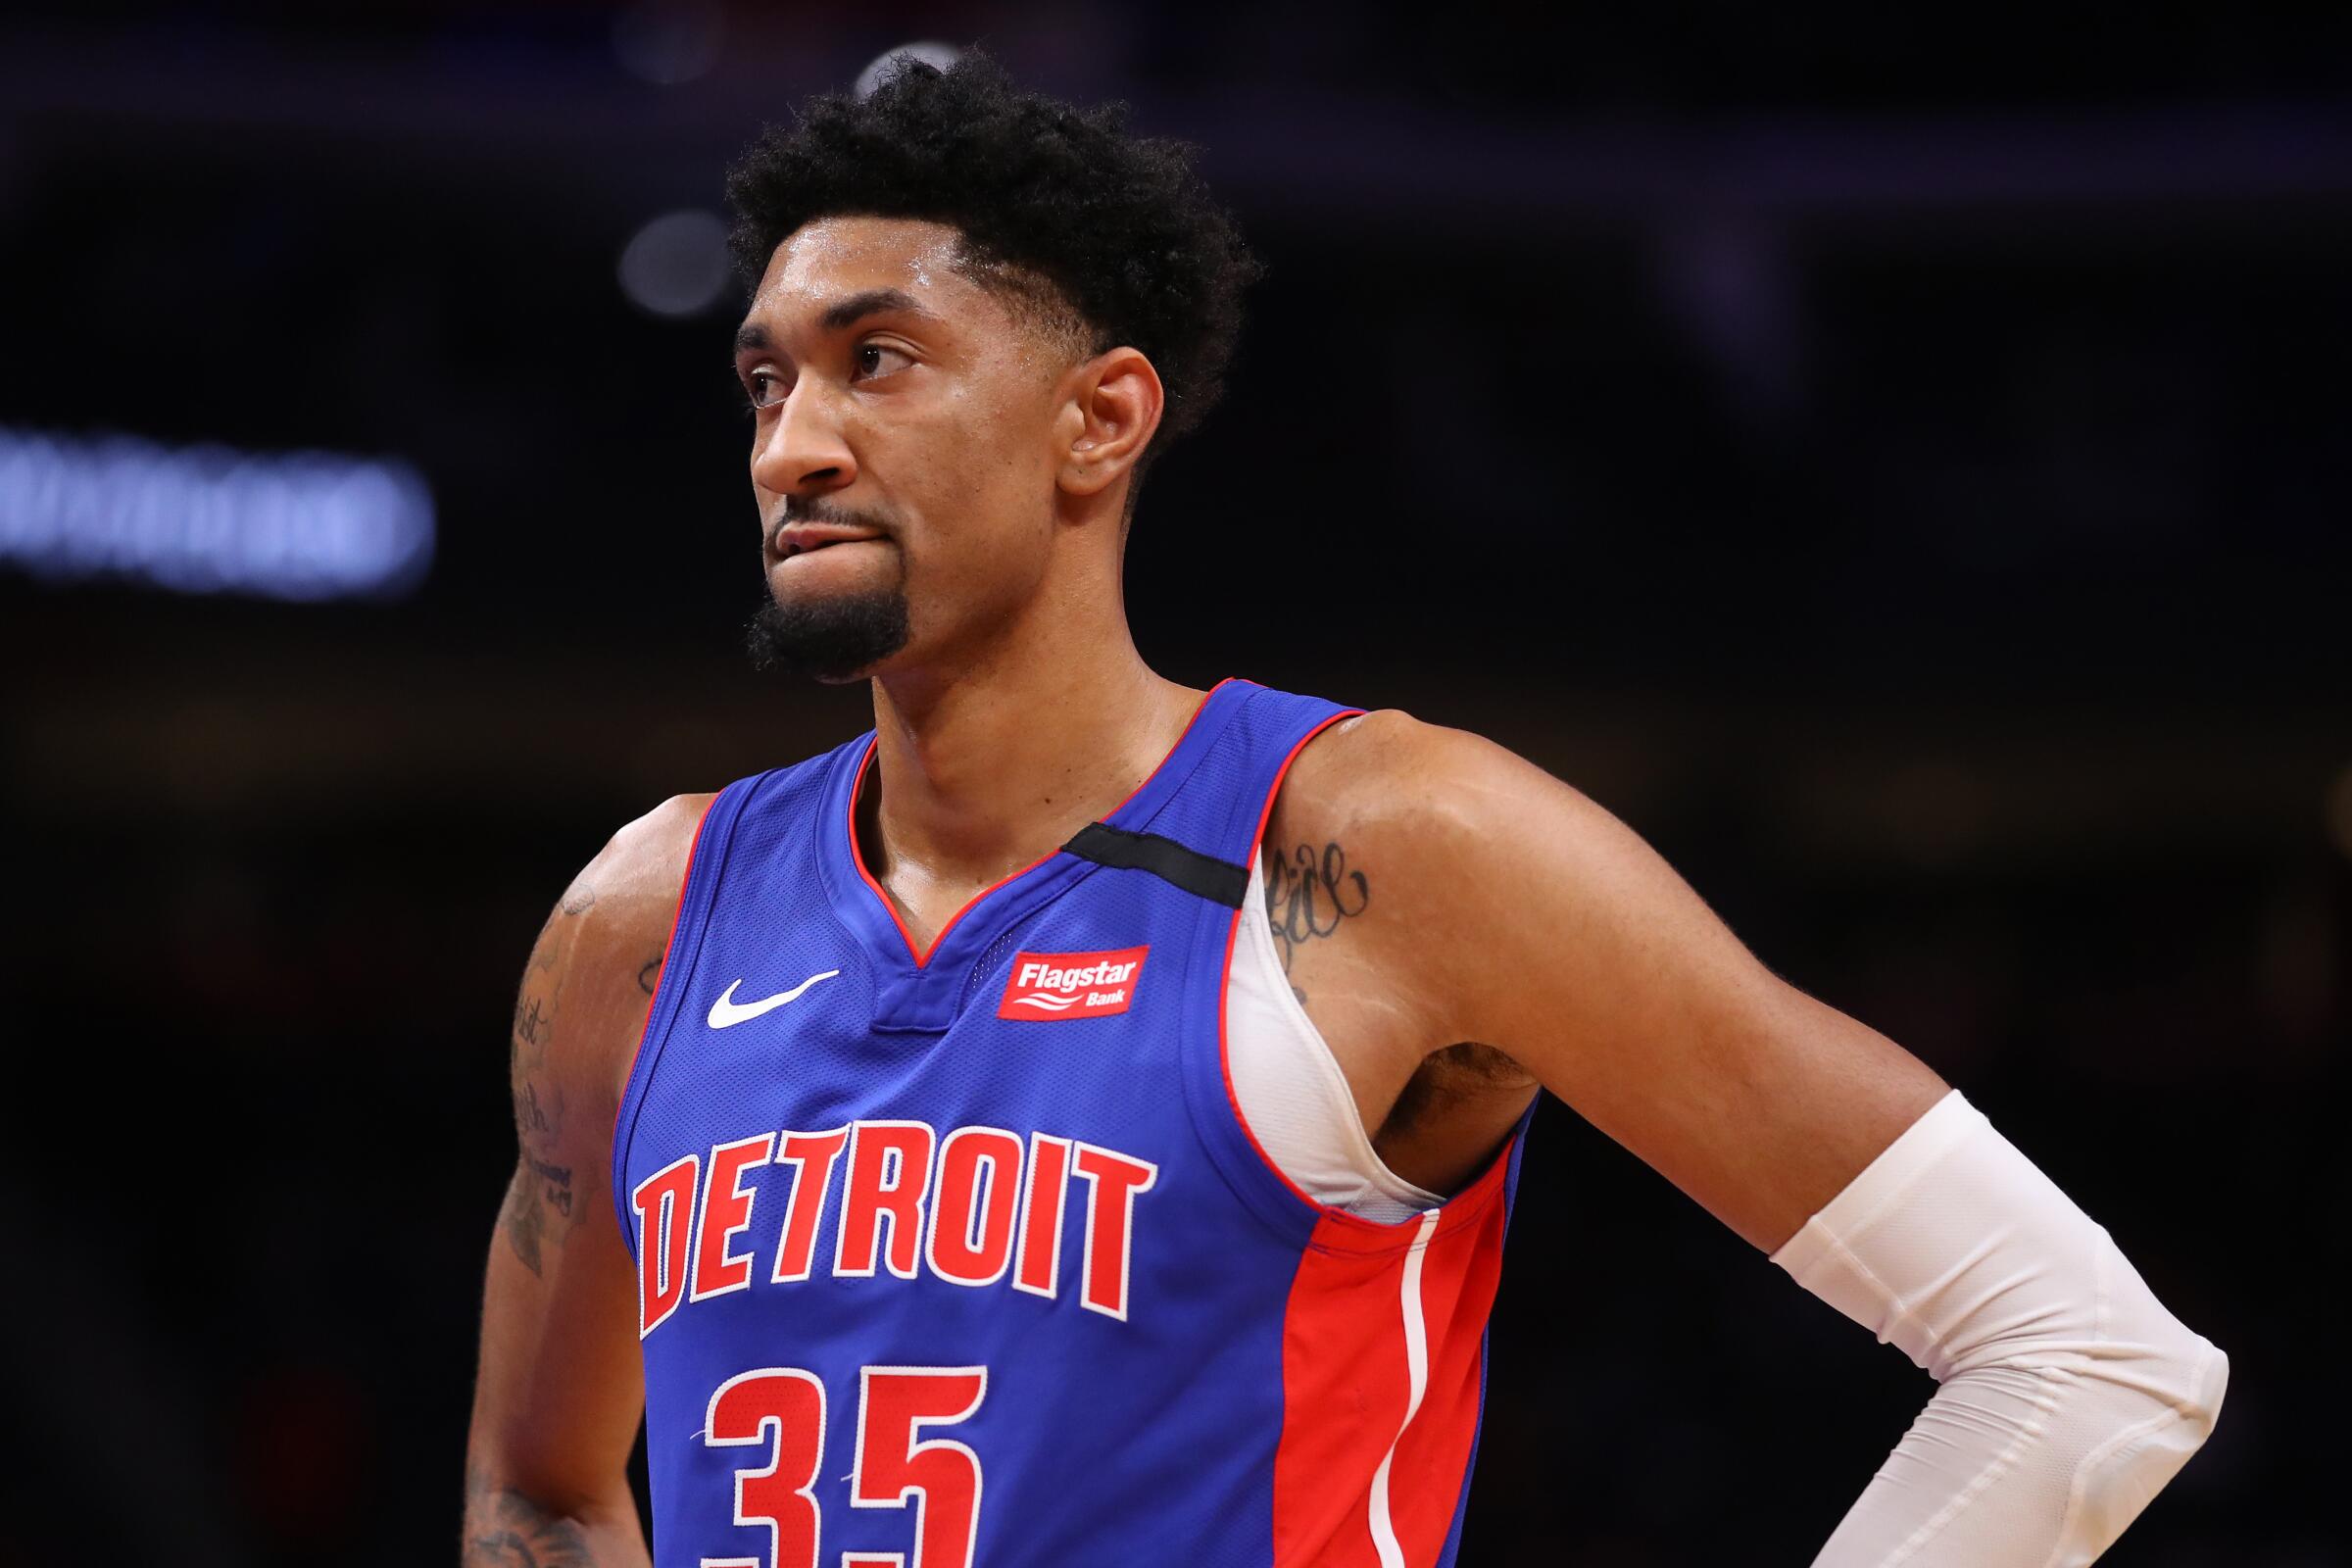 Detroit Pistons forward Christian Wood is among the athletes from around the world who have tested positive for the coronavirus.